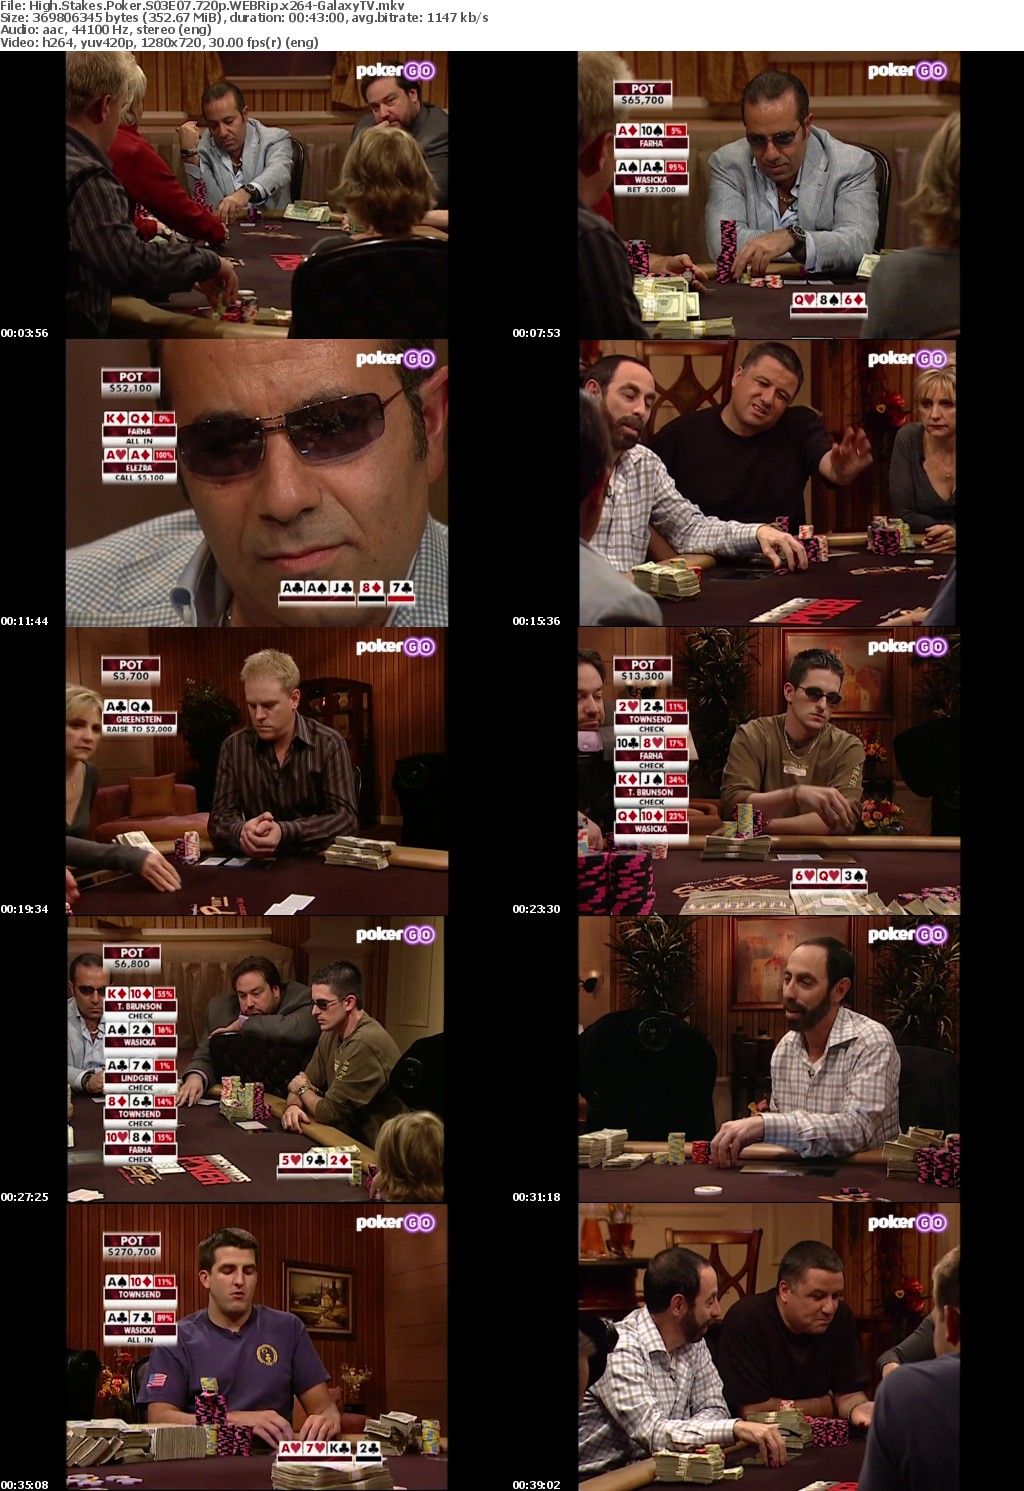 High Stakes Poker S03 COMPLETE 720p WEBRip x264-GalaxyTV